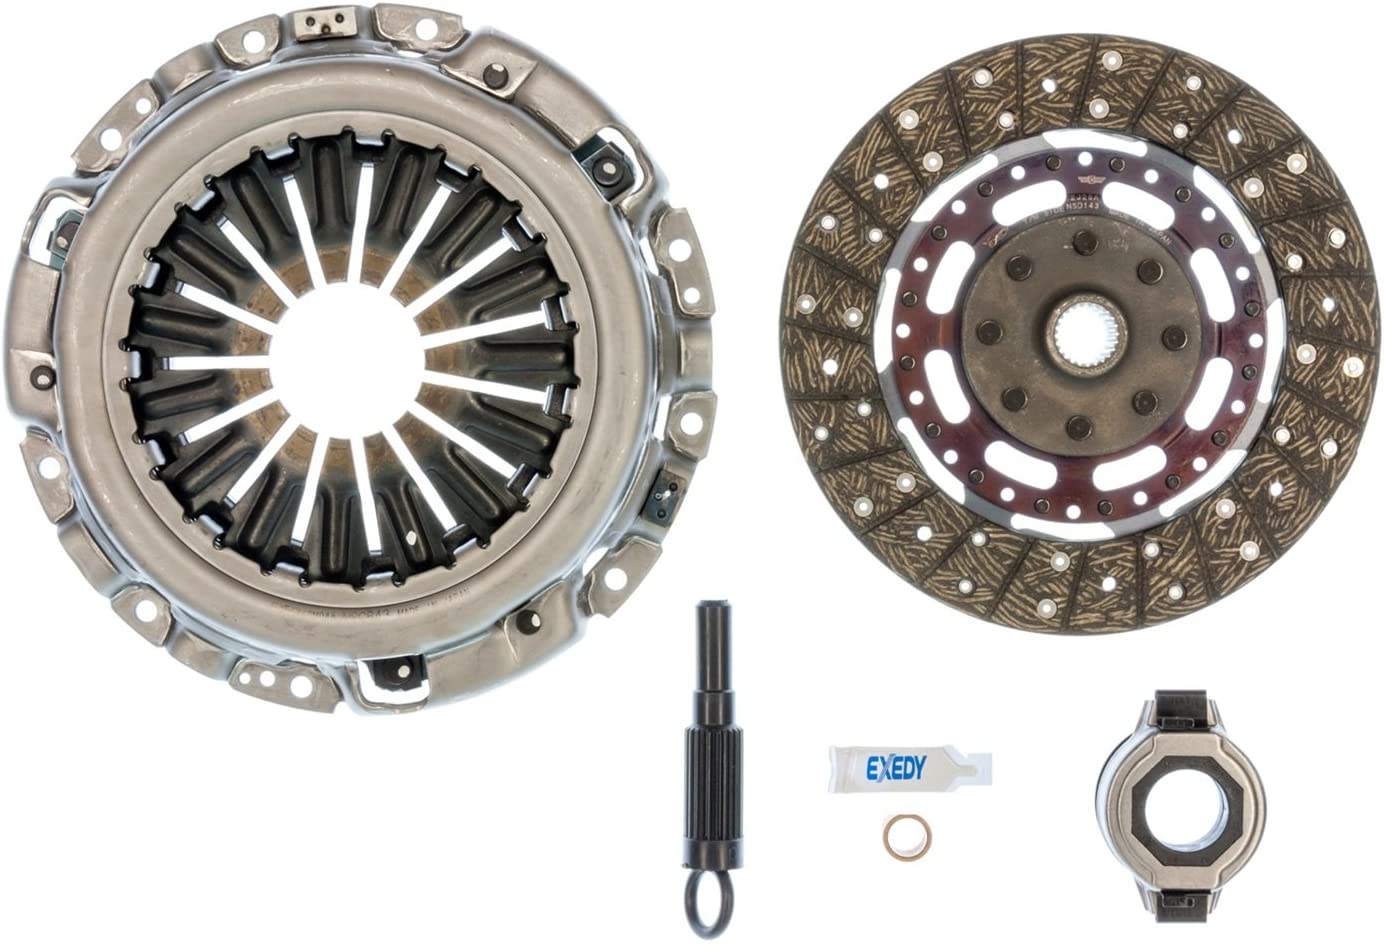 EXEDY NSK1002 OEM Replacement Clutch Kit